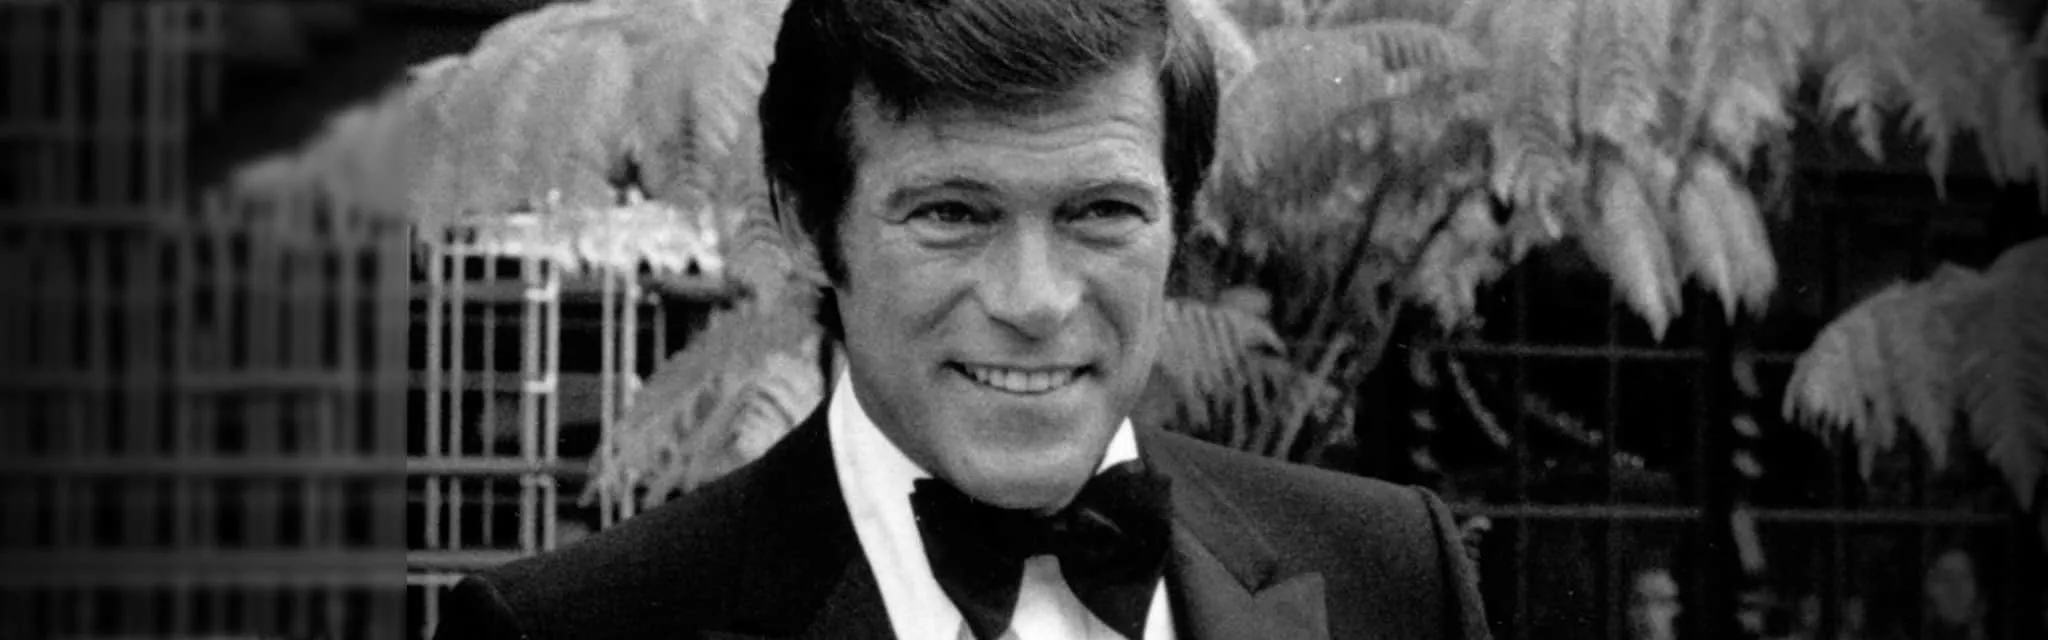 Christopher George - American television actor